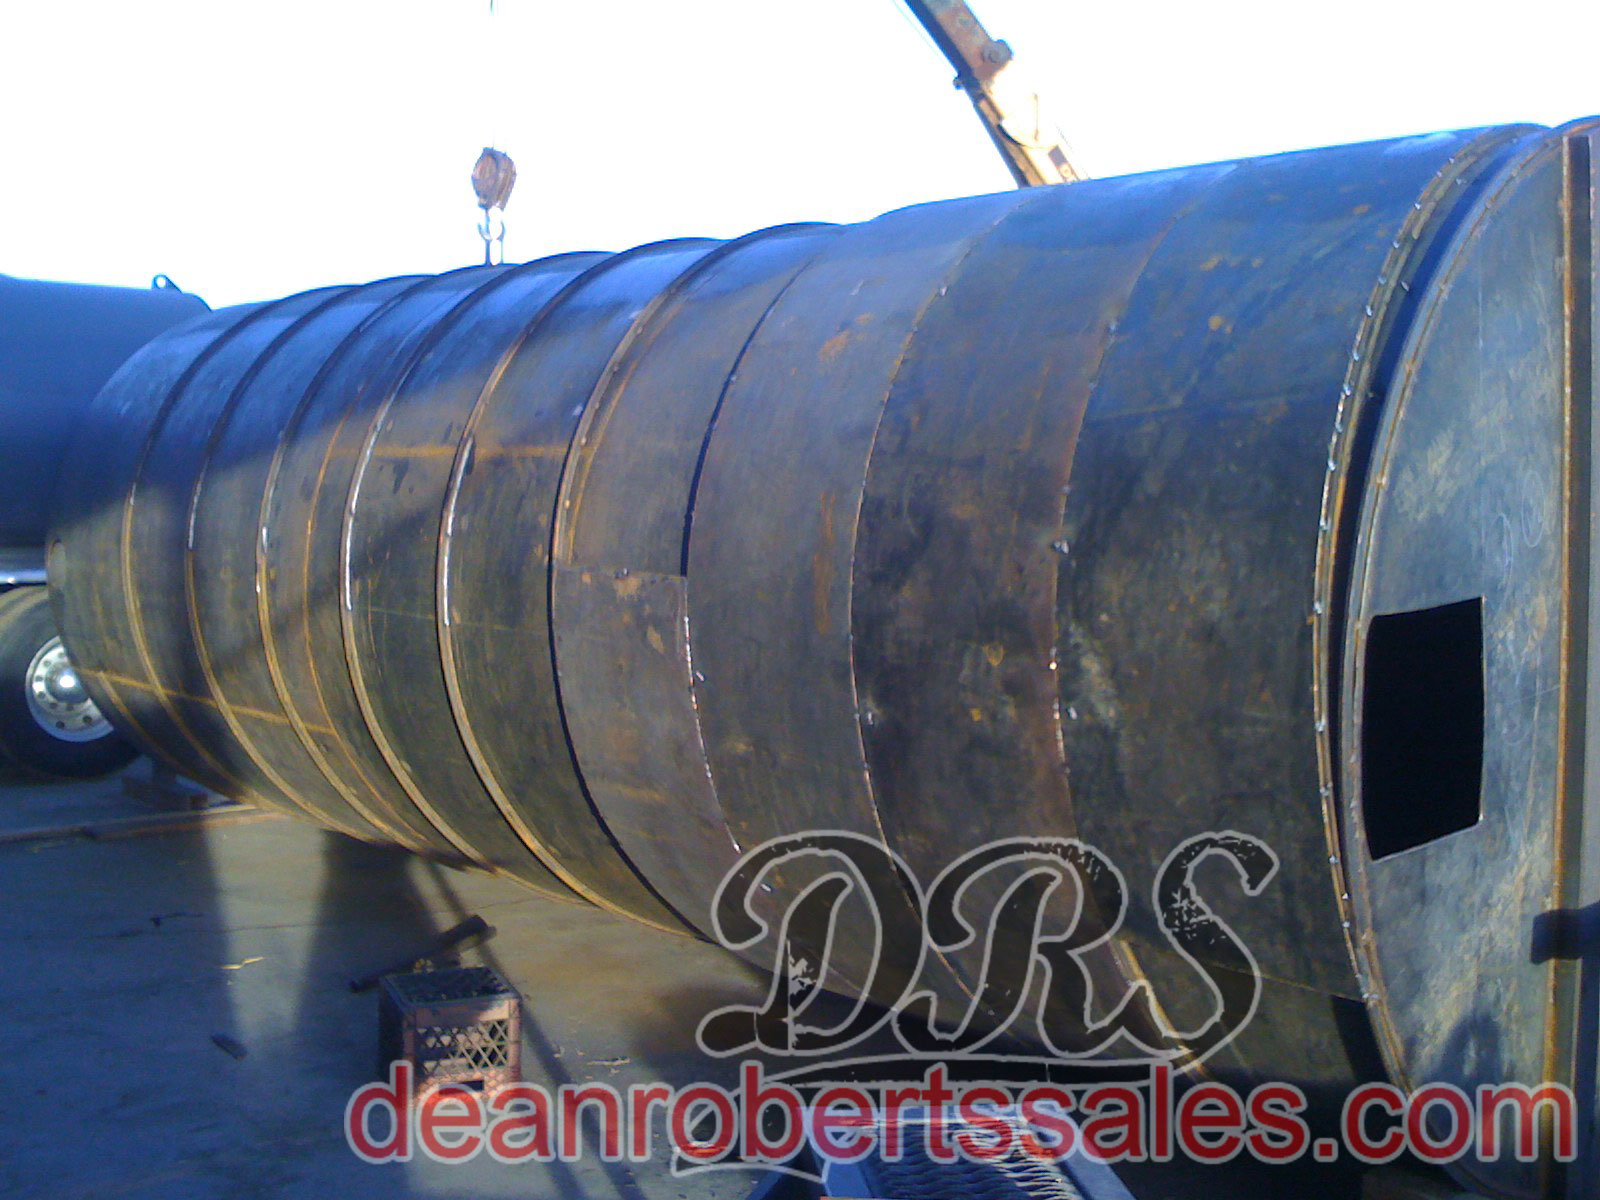 CUSTOM SPECIALTY SEALCOAT TANKS TRUCKS AND HELICAL MIXERS BY DEAN ROBERTS SALES.